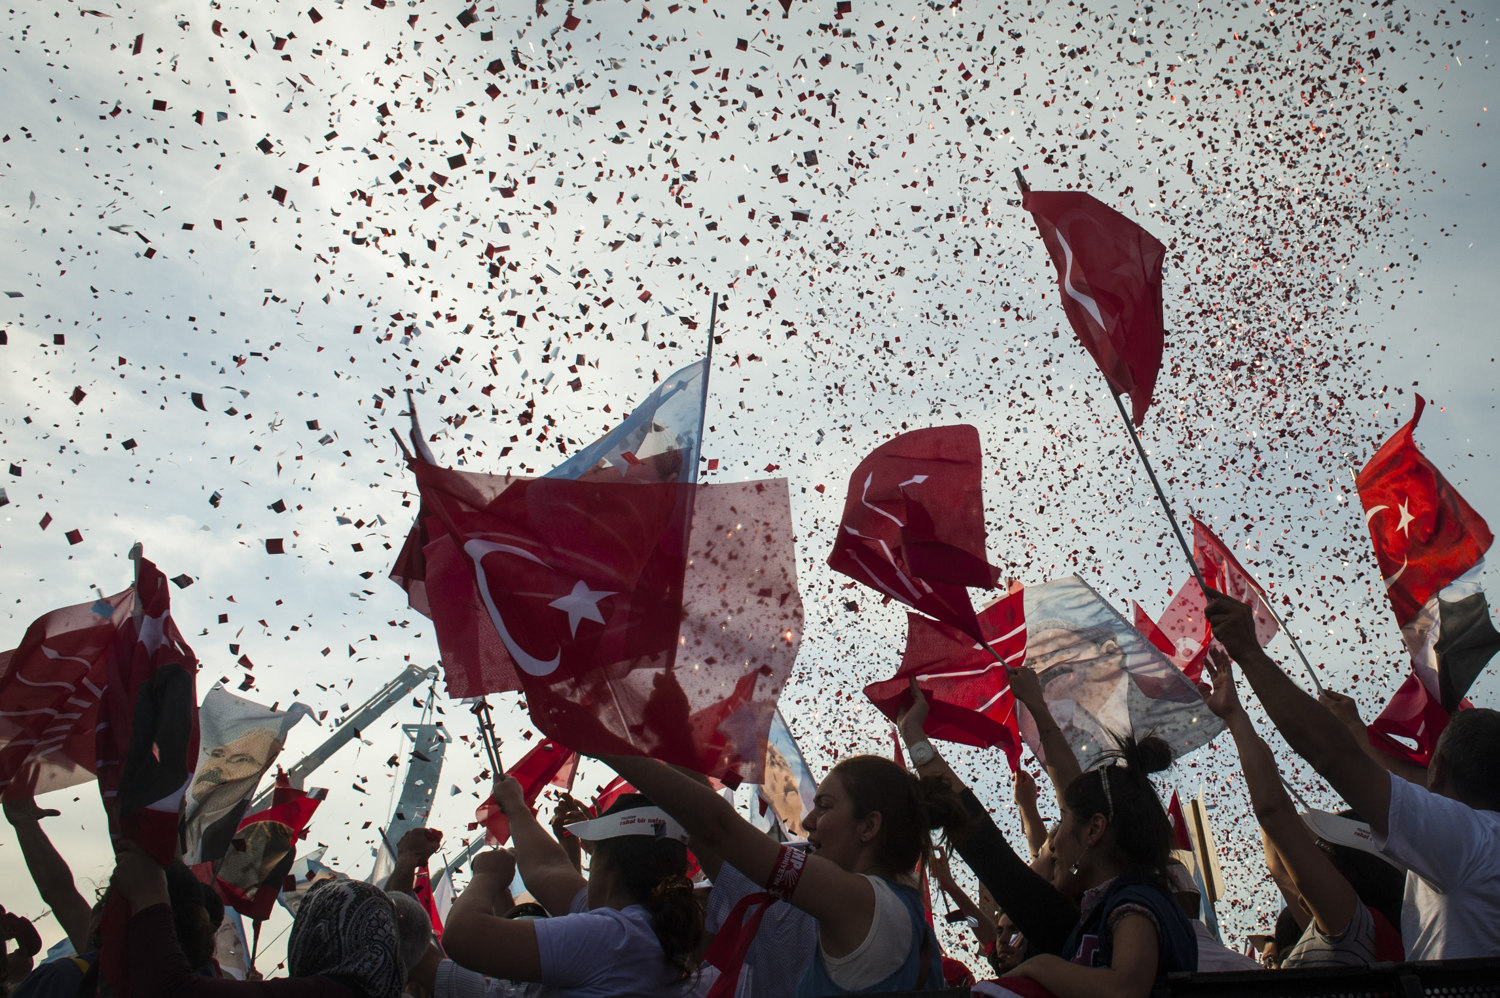  Supporters of the Republican People's Party (Cumhuriyet Halk Partisi, CHP) gather in Istanbul Turkey for the final political rally for Kemal Kılıçdaroğlu- candidate  for Prime Minister.  